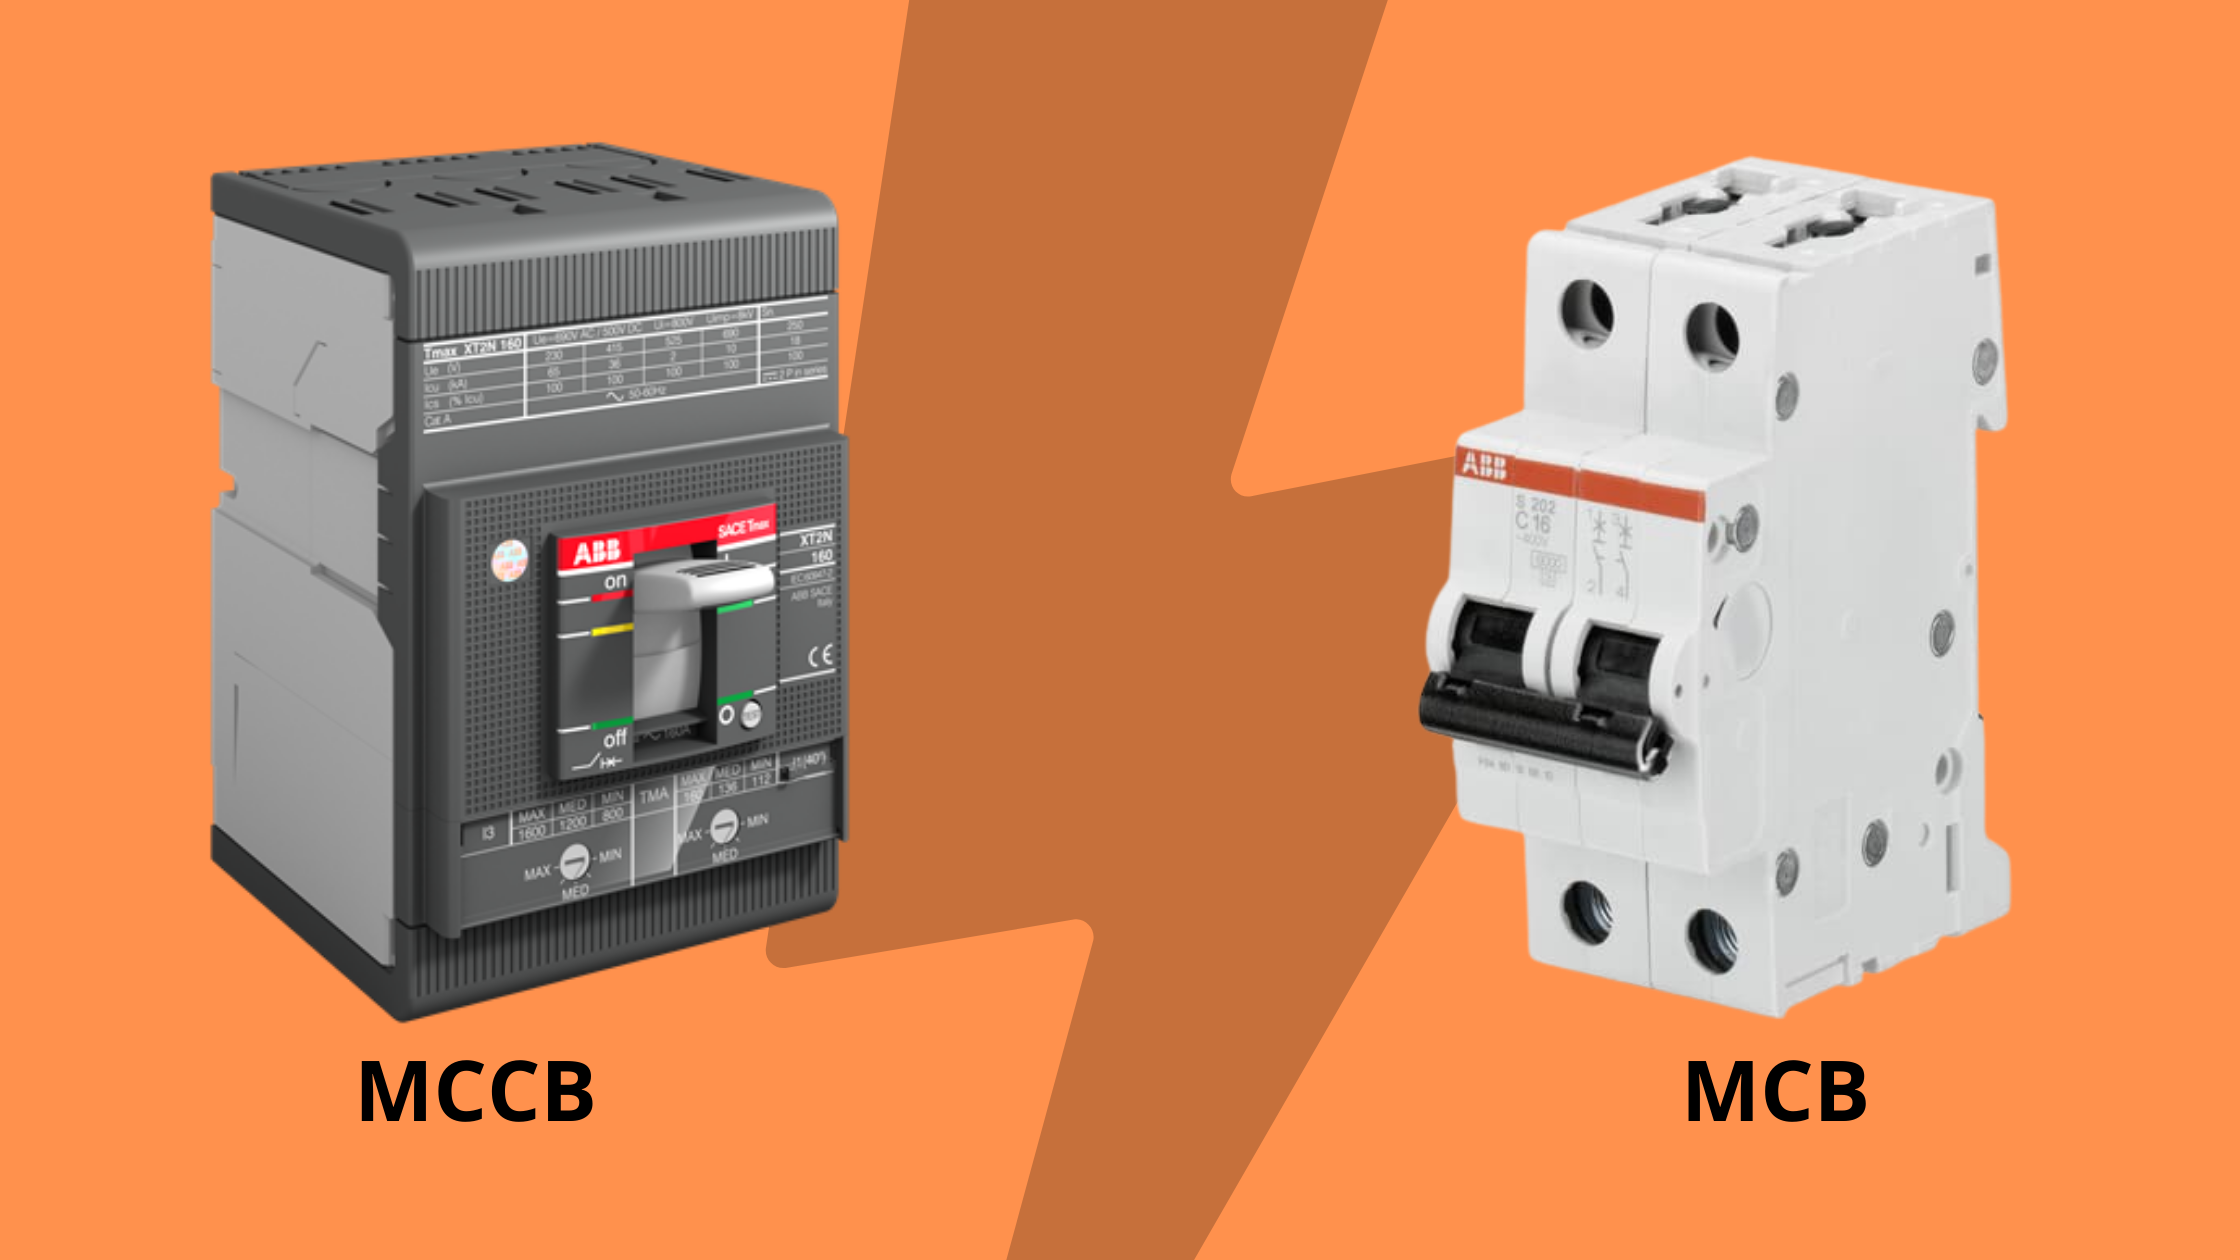 Differences between MCB and MCCB